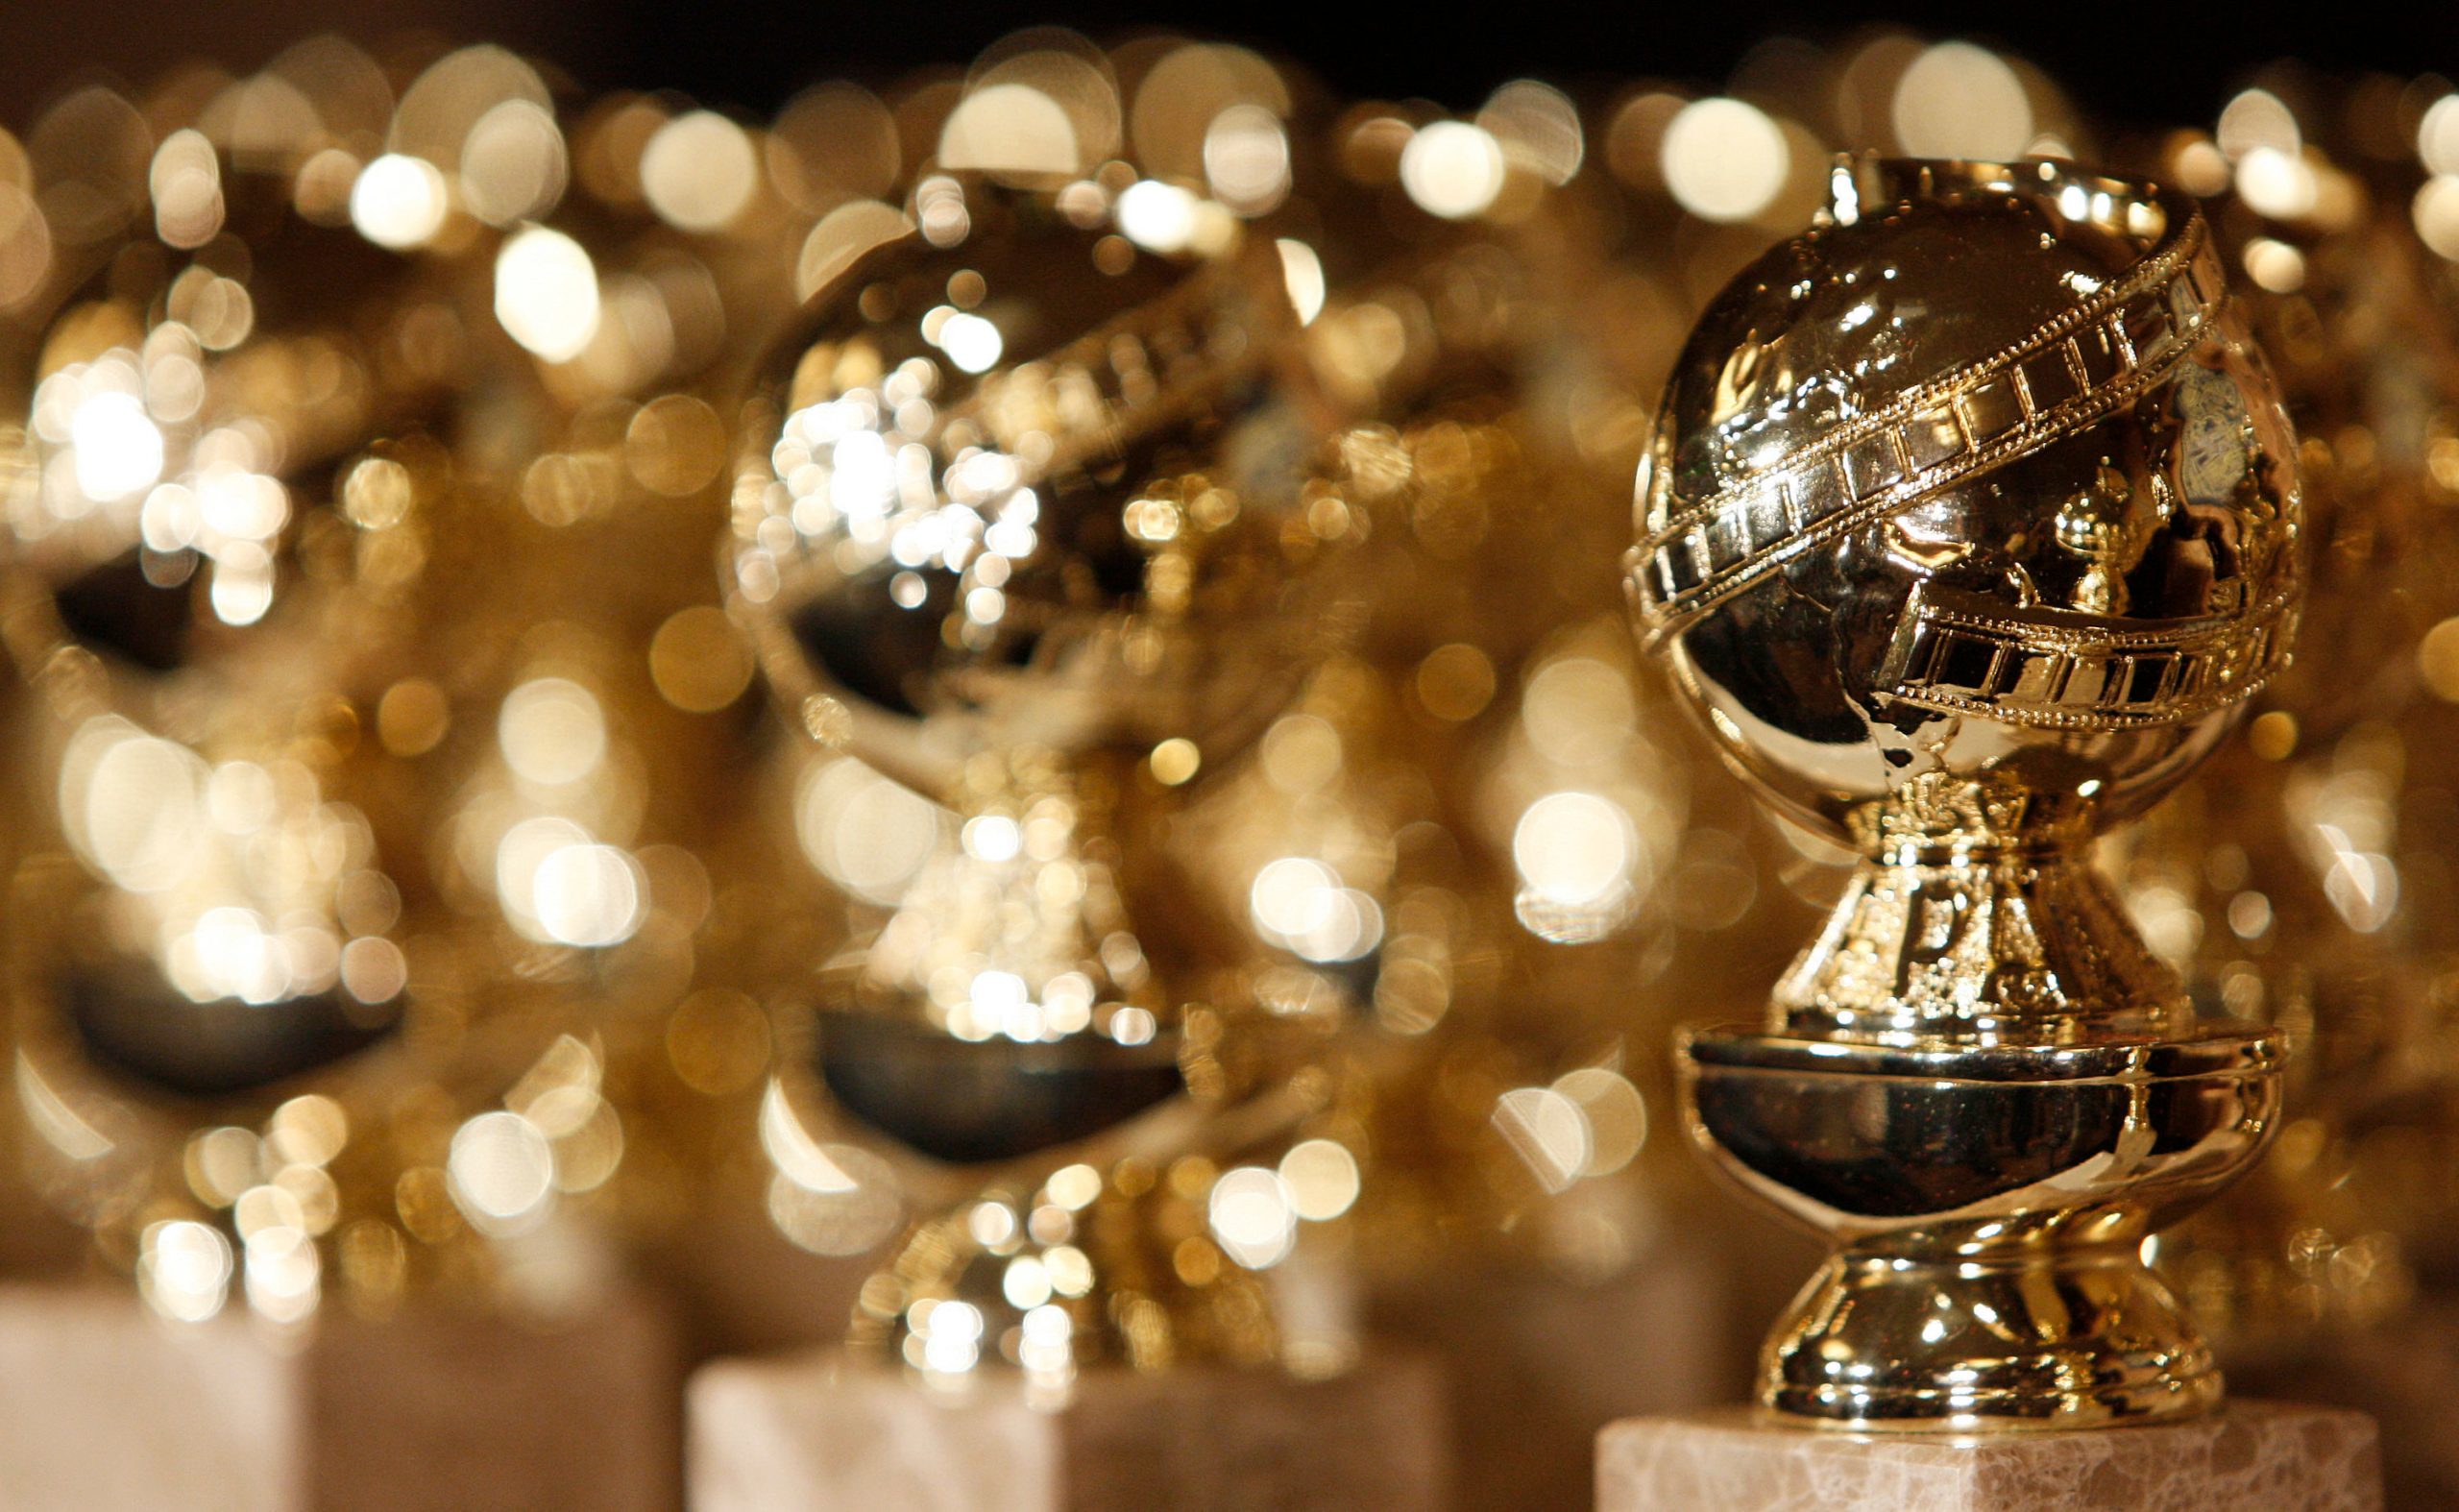 Golden Globes back at NBC: All you need to know